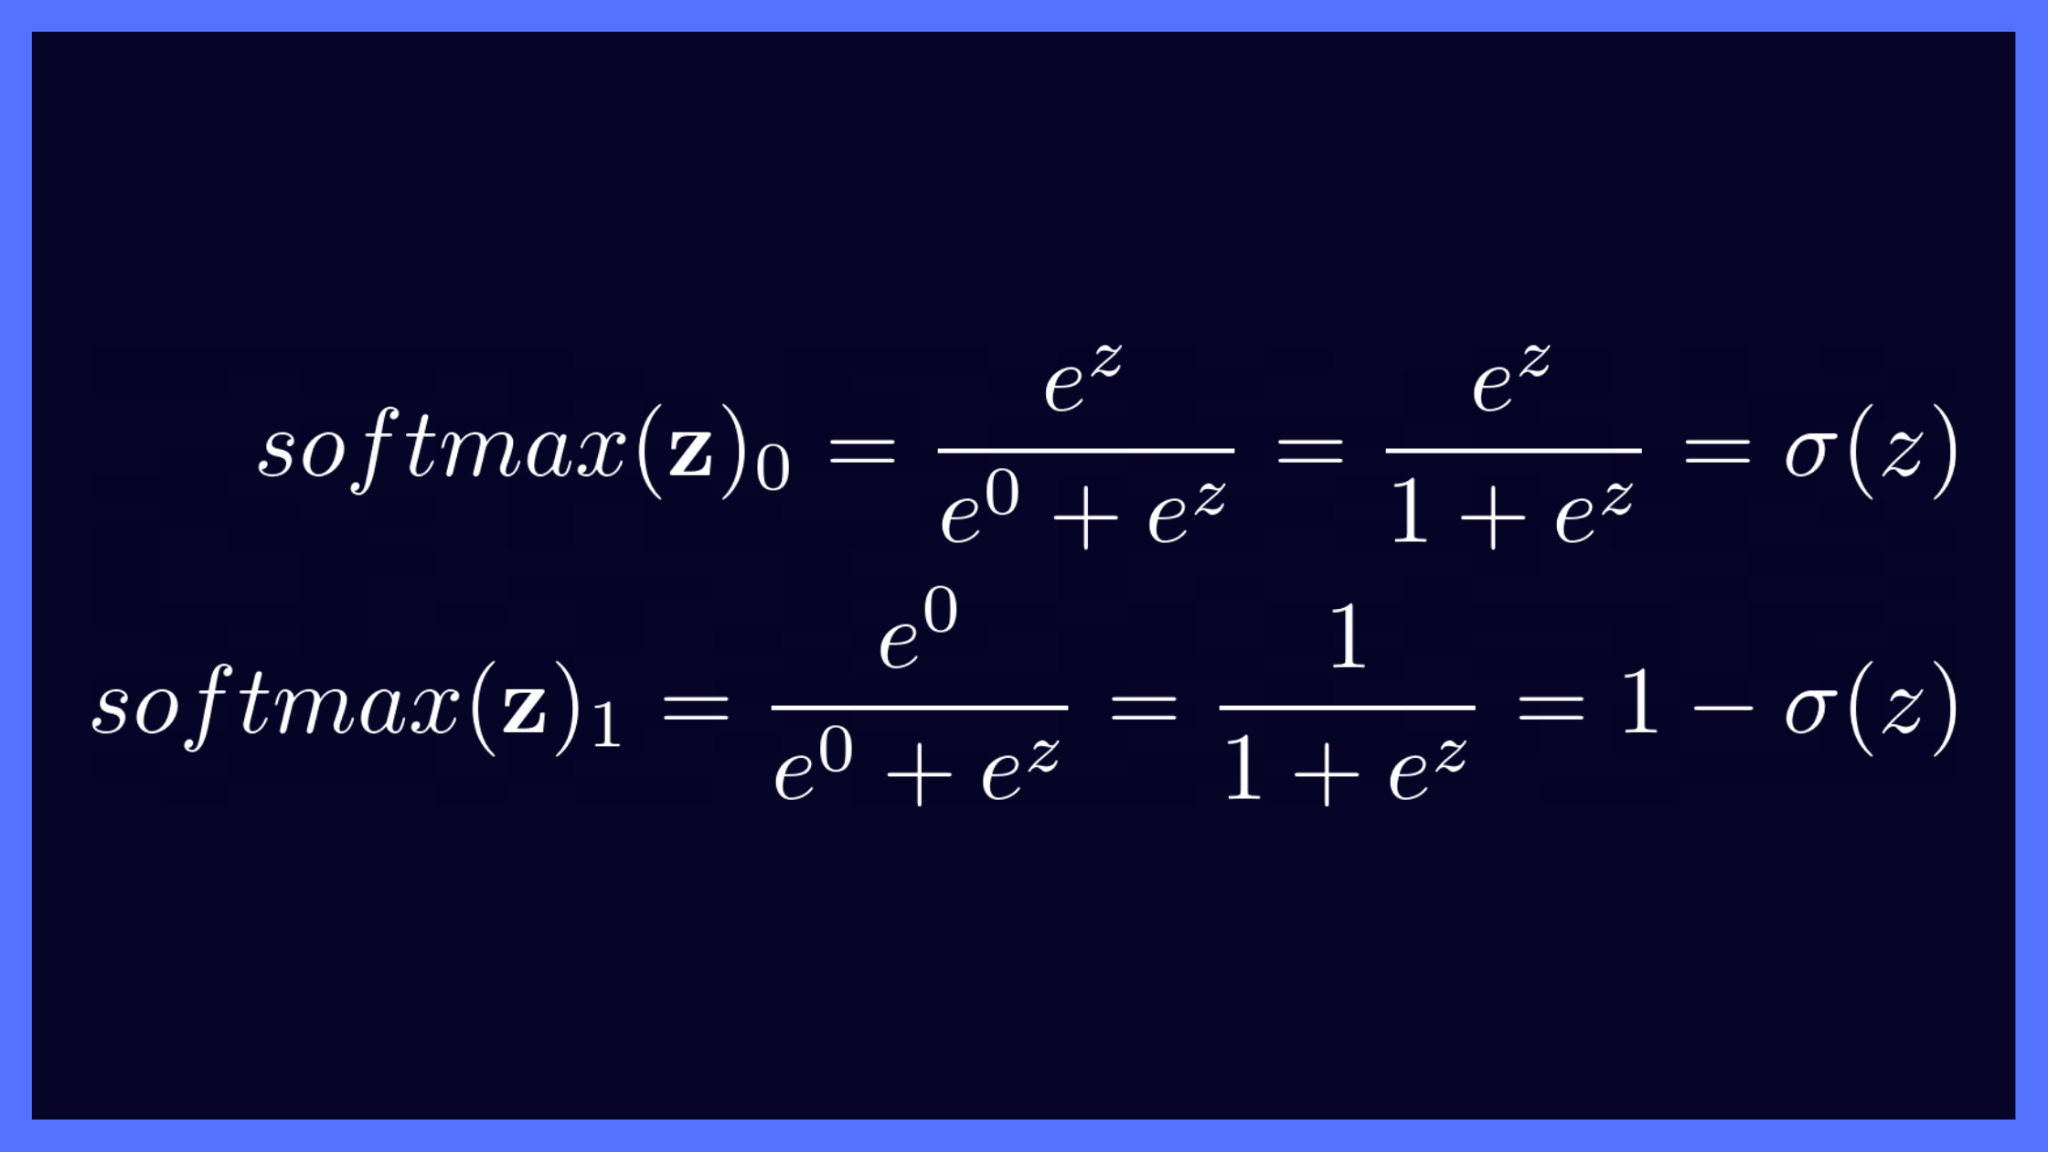 Equivalence of Sigmoid &amp; Softmax Activations